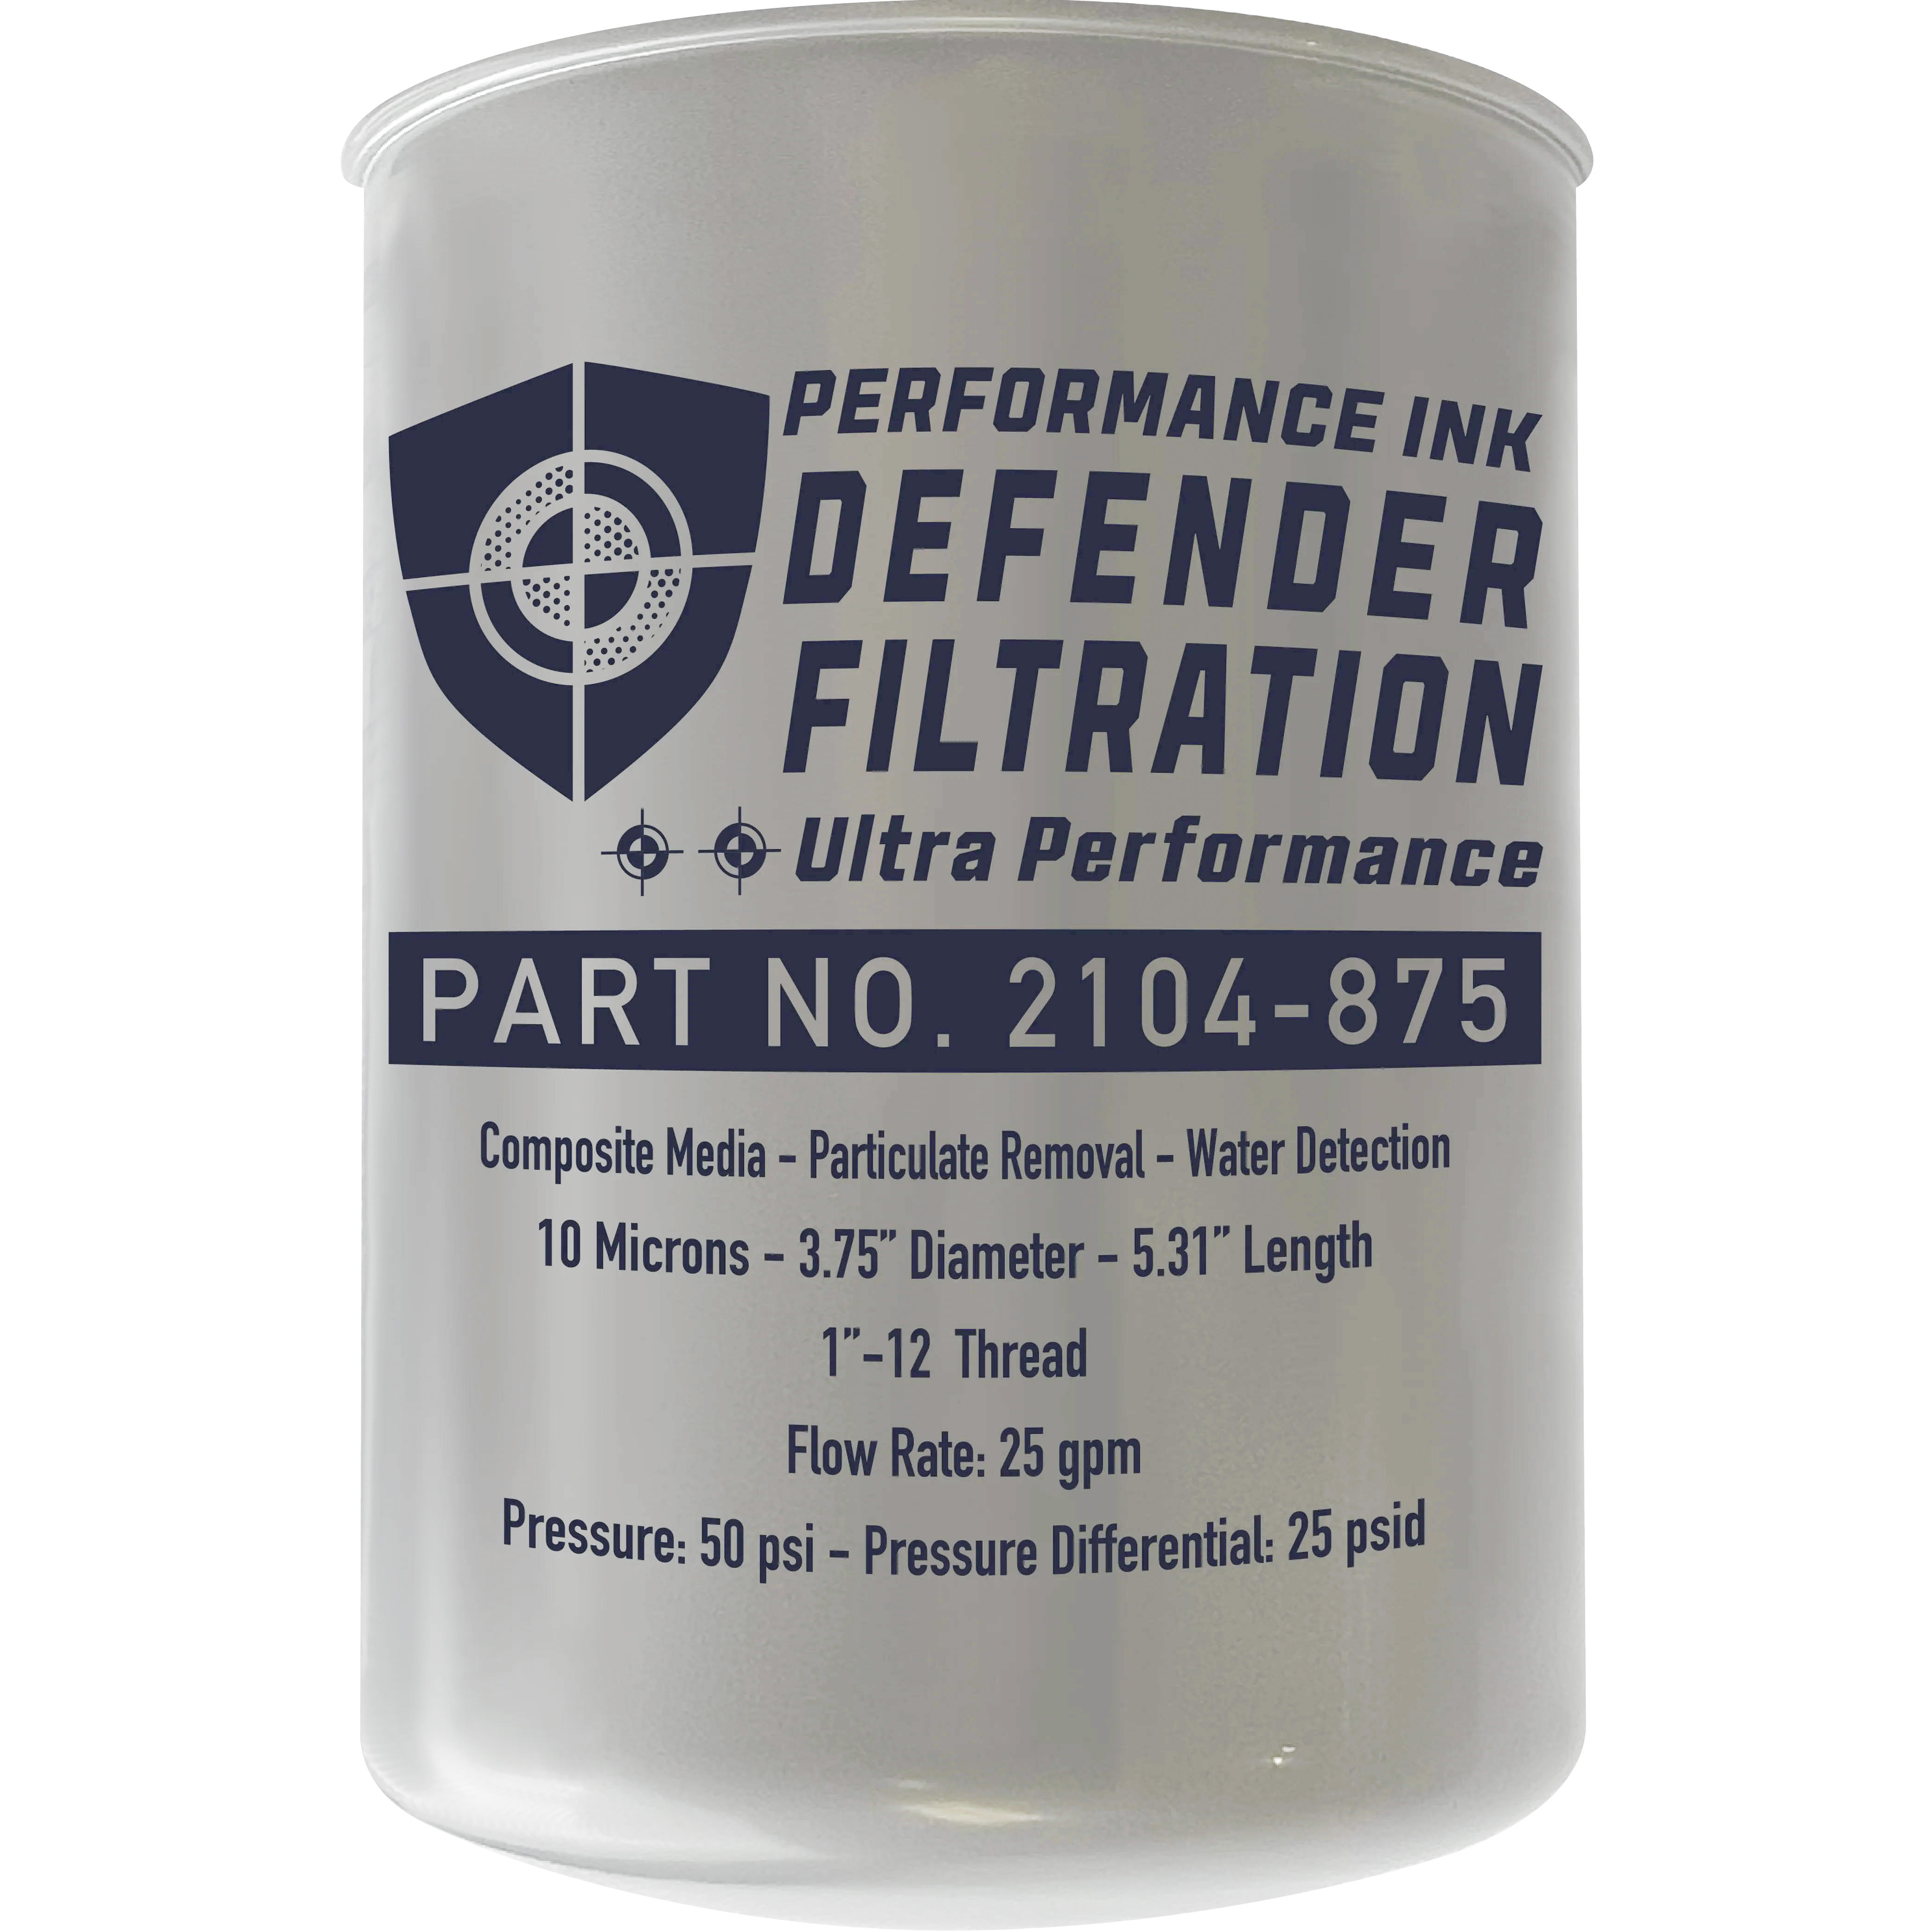 PI-2104-875 Performance Ink Ultra Performance 10 Micron Hydrosorb Spin-On Filter. - Detects Water In Fuel - For Use w/ Diesel, Gasoline or ULSD (Ultra Low Sulfur Diesel)